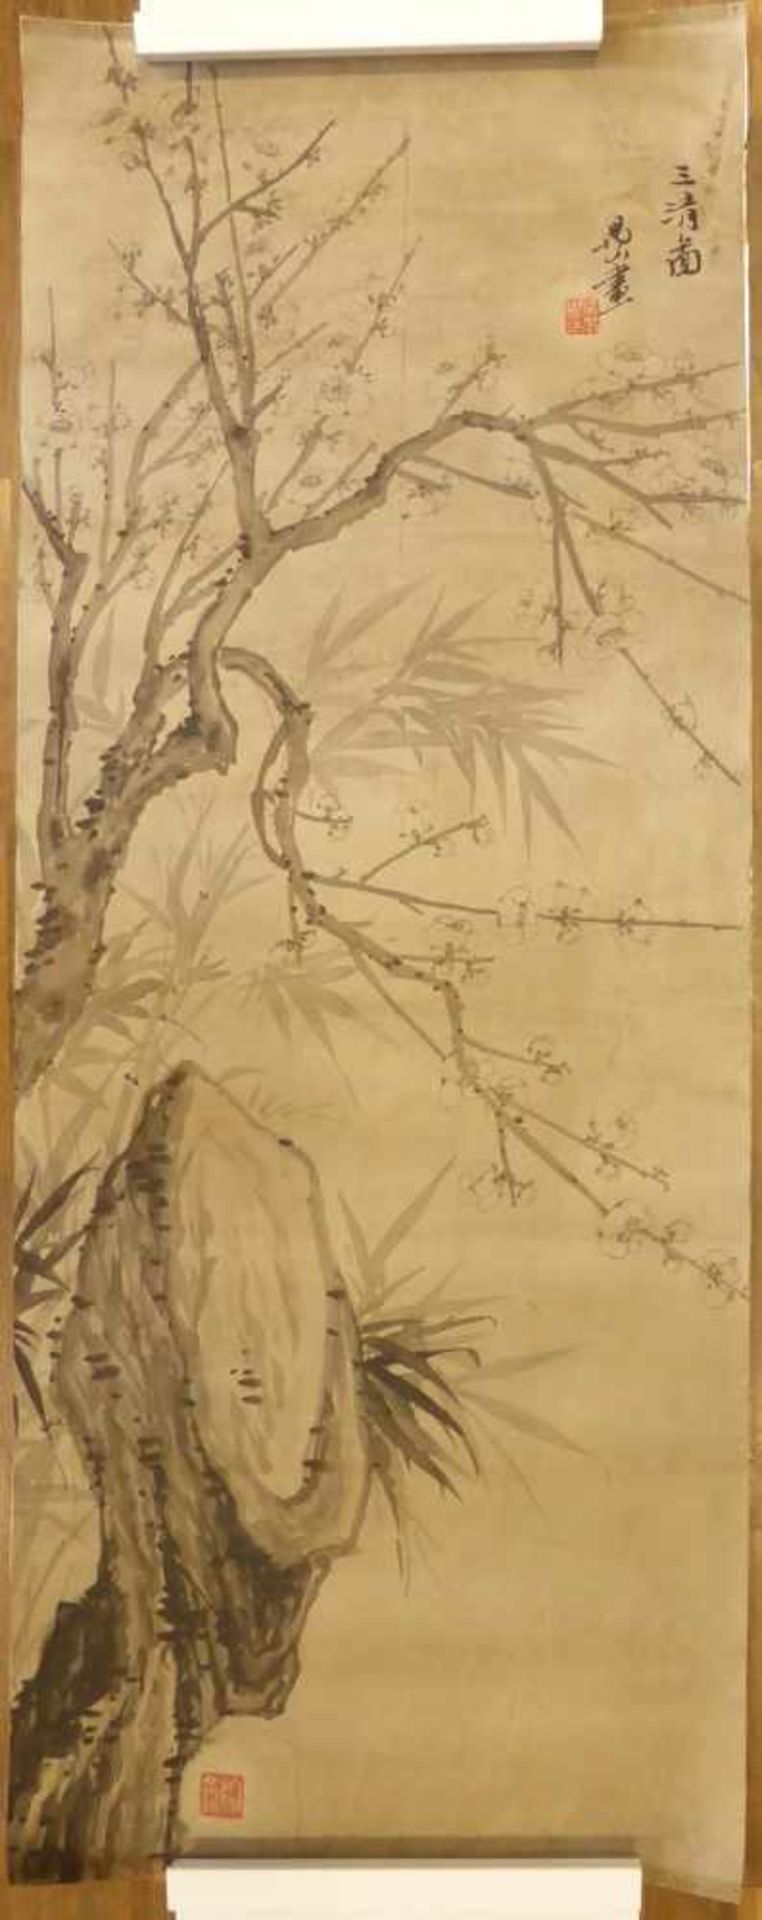 TWO INK PAINTINGS WITH PLUMS. China. 19th/20th c. Ink on paper resp. silk. a) Flowering plums. - Image 2 of 2